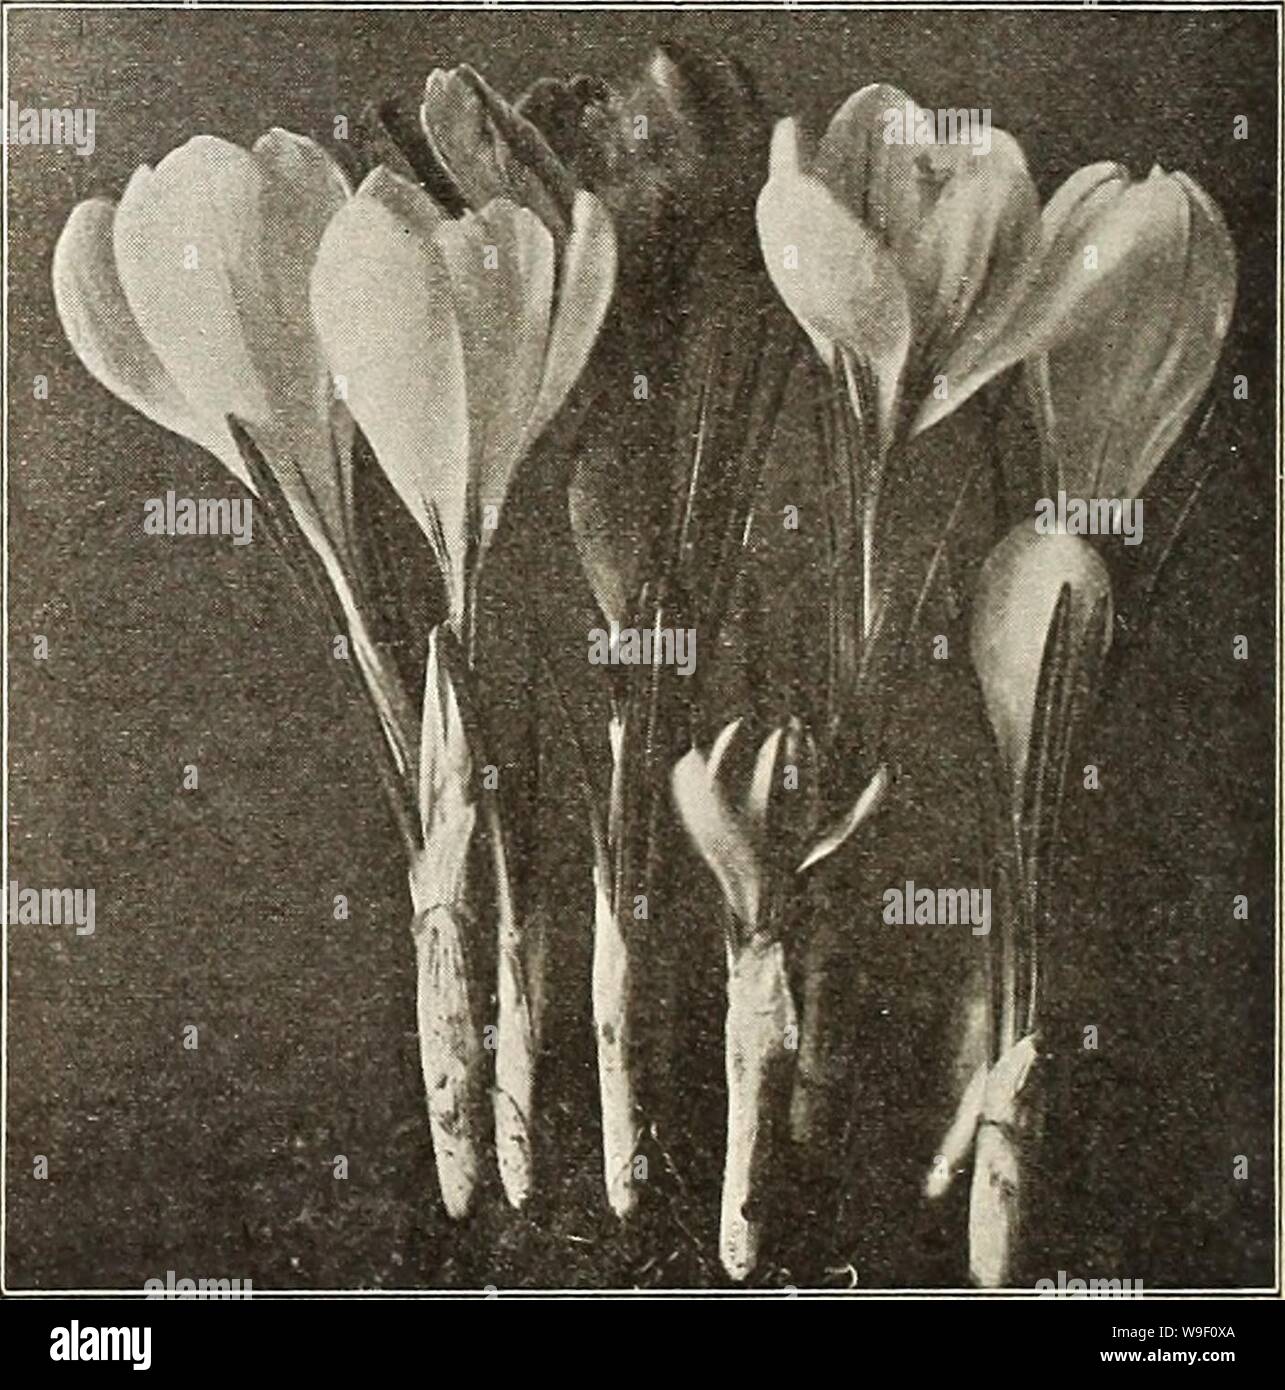 Archive image from page 7 of Currie's bulbs and plants . Currie's bulbs and plants : autumn 1916  curriesbulbsplan19curr 9 Year: 1916 ( DOUBLE TULIP COURONNE D'OR. PARROT TULIPS Parrot tulips, so called because of their brilliant, parrot- like coloring, are large, fantastically showy flowers with curled and crested petals. They come into bloom about the middle of May and remain in bloom for a long time. Each Doz. 100 1000 Admiral ConstantinopleâRed $.03 $.30 $2.00 $15.00 Cramoisie BrilliantâDeep crimson, with large, black, star-shaped center LuteaâYellow PerfectaâYellow and scarlet Finest Mixe Stock Photo